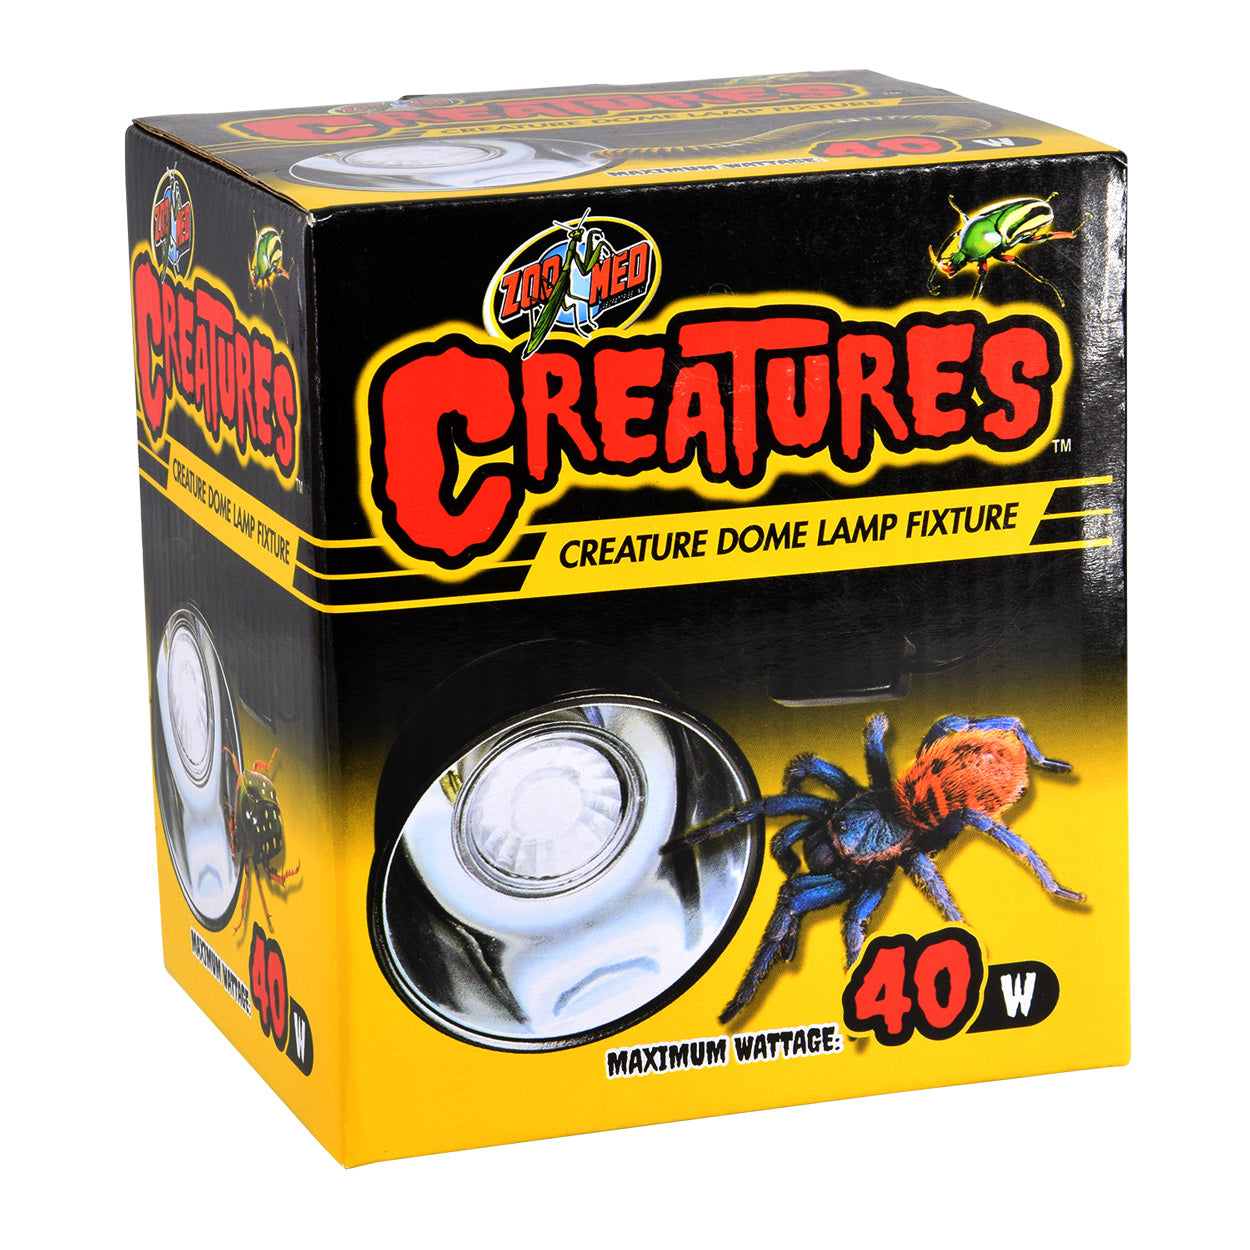 Zoo Med Creature Dome Lamp Fixture - 40 W